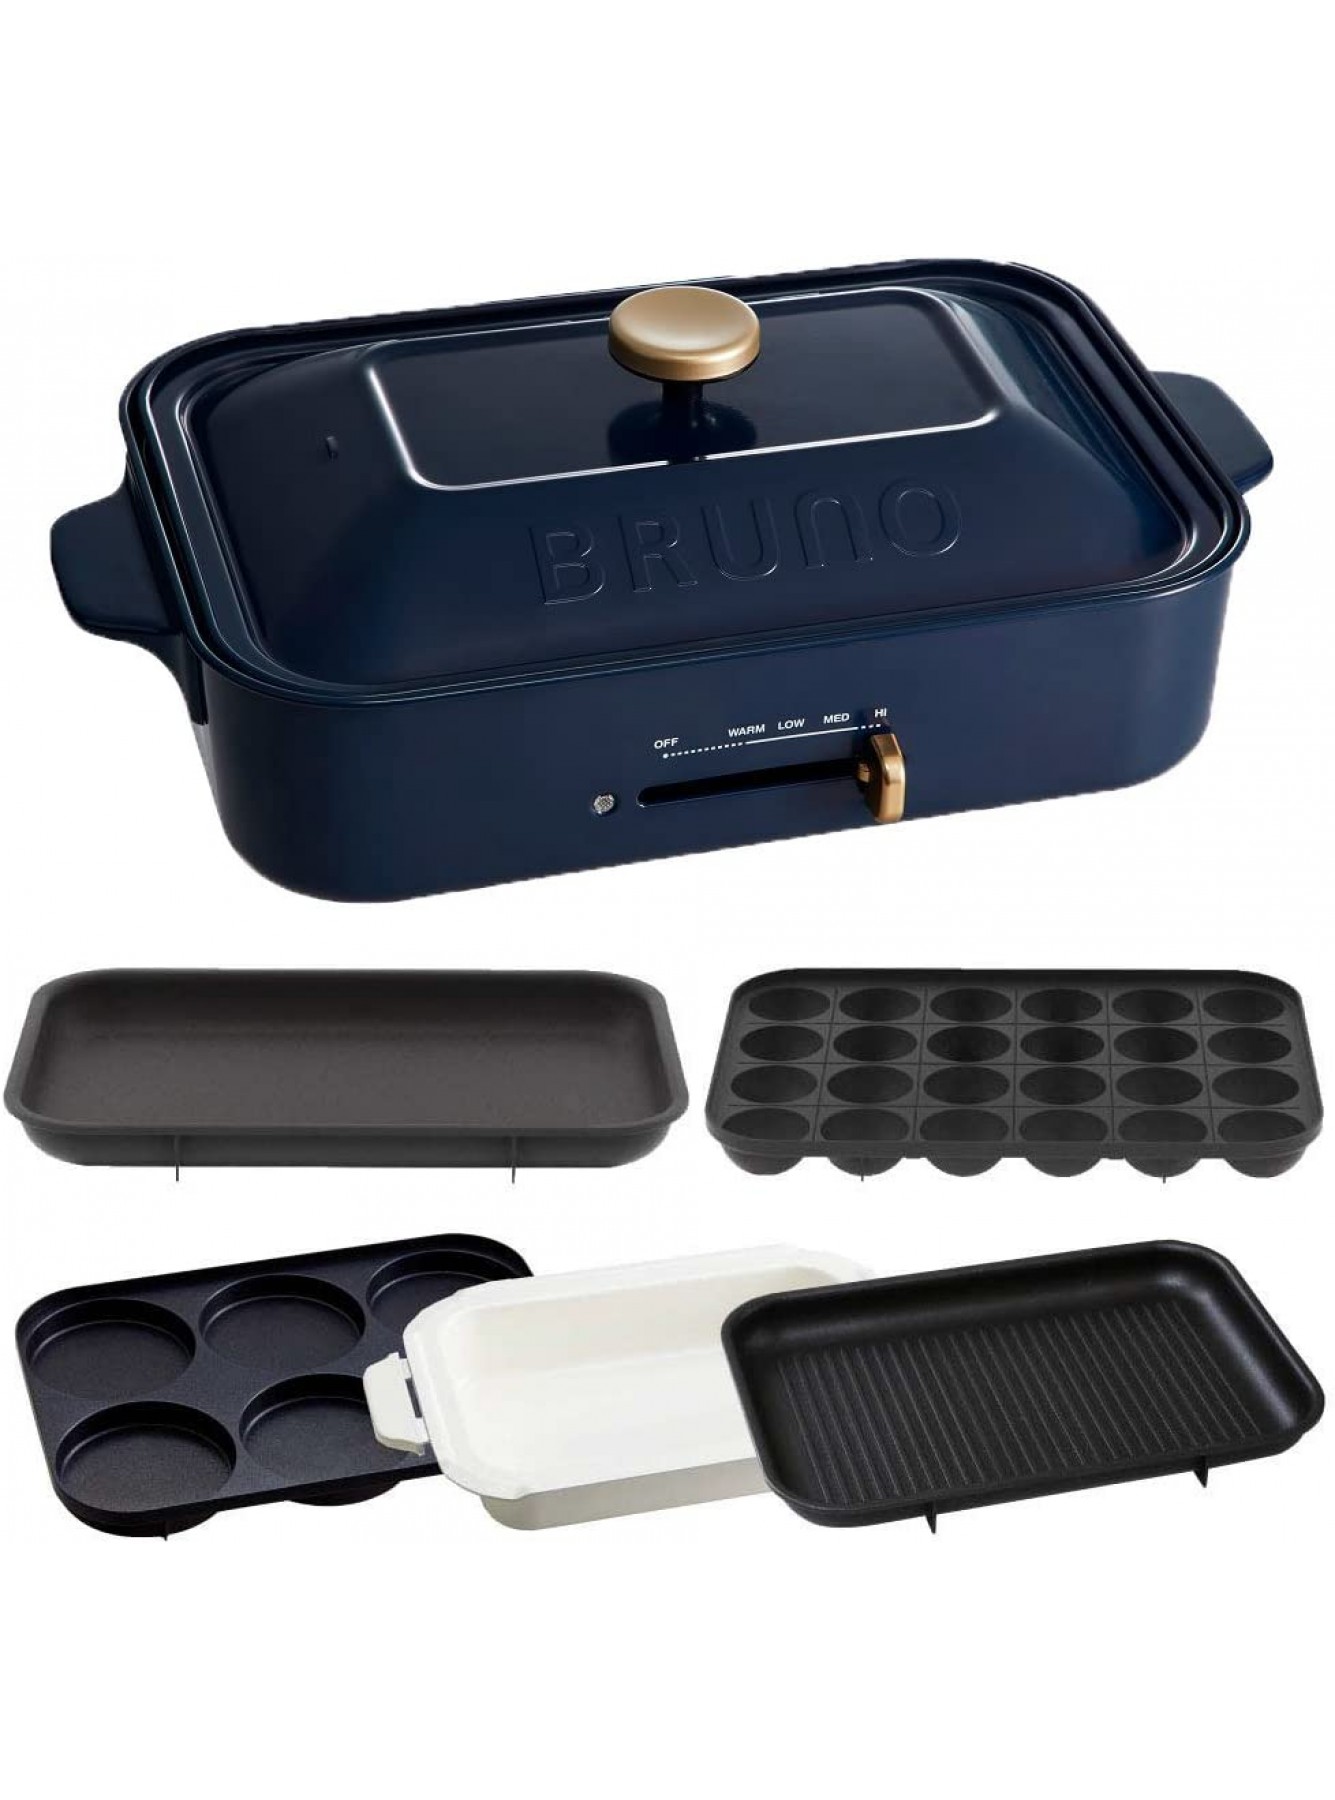 BRUNO Compact Hot Plate + Multi Plate + Grill Plate + Ceramic Coat Pot 4 Pieces Set Navy BOE021-NV【Japan Domestic genuine products】【Ships from JAPAN】 B07CS4Y19R